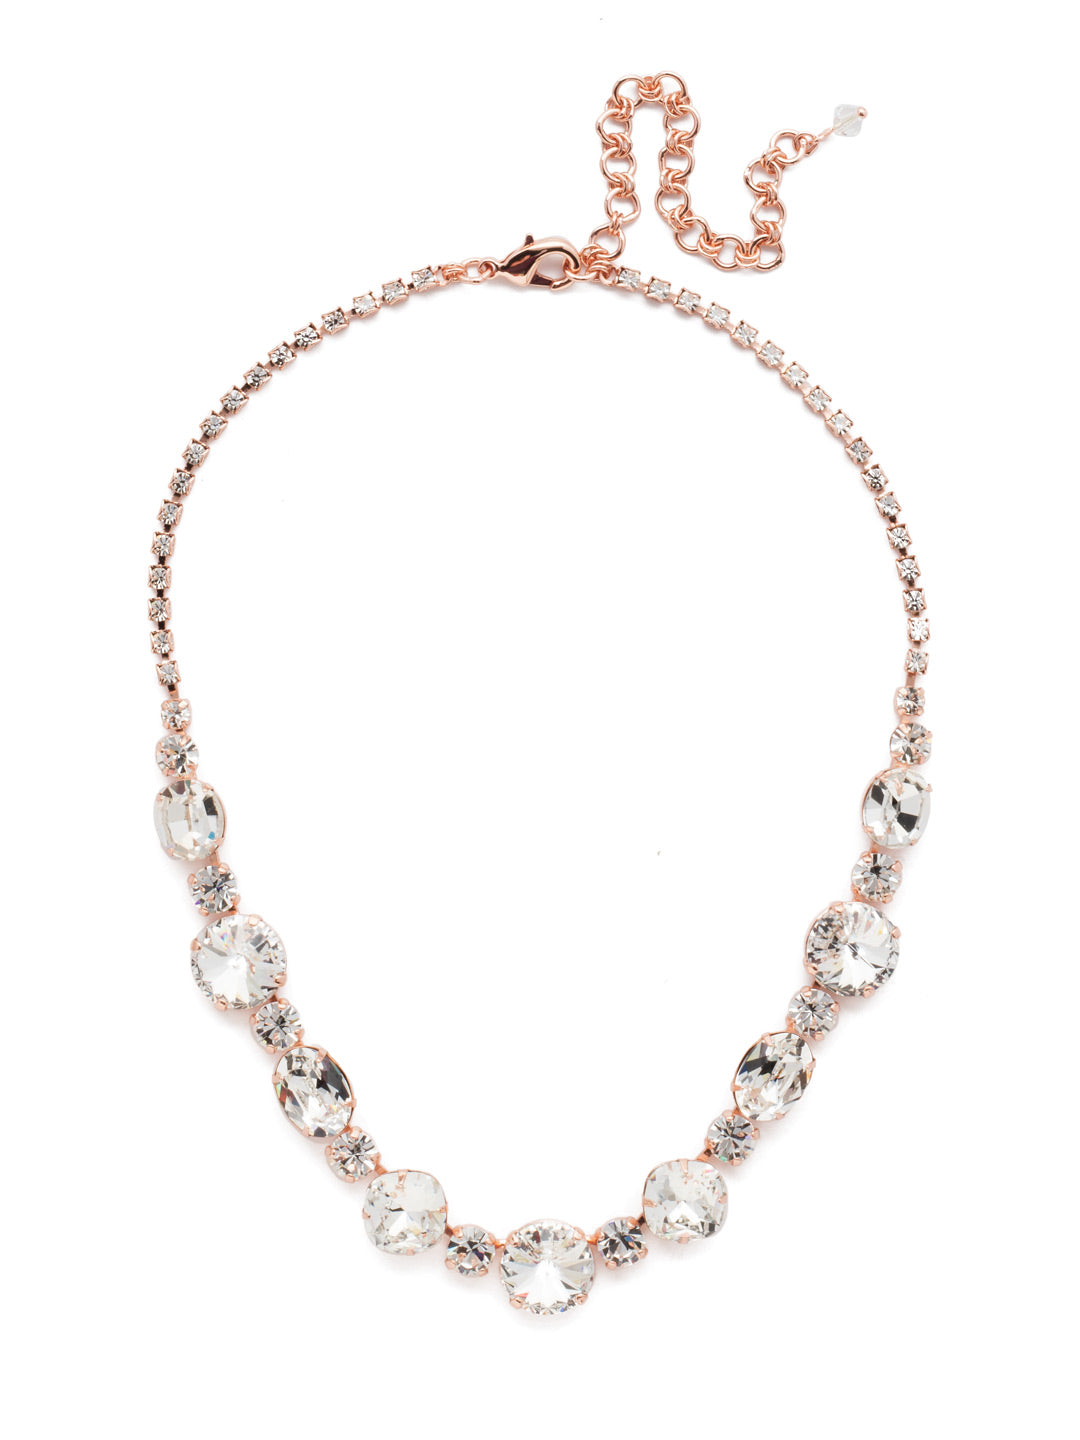 Full Circle Statement Necklace - NDQ43RGCRY - <p>Need a look that goes full circle? Three circular rivoli crystals mix with other round and oval gems in this everyday stunner. A rhinestone chain completes the look for all-around allure. From Sorrelli's Crystal collection in our Rose Gold-tone finish.</p>